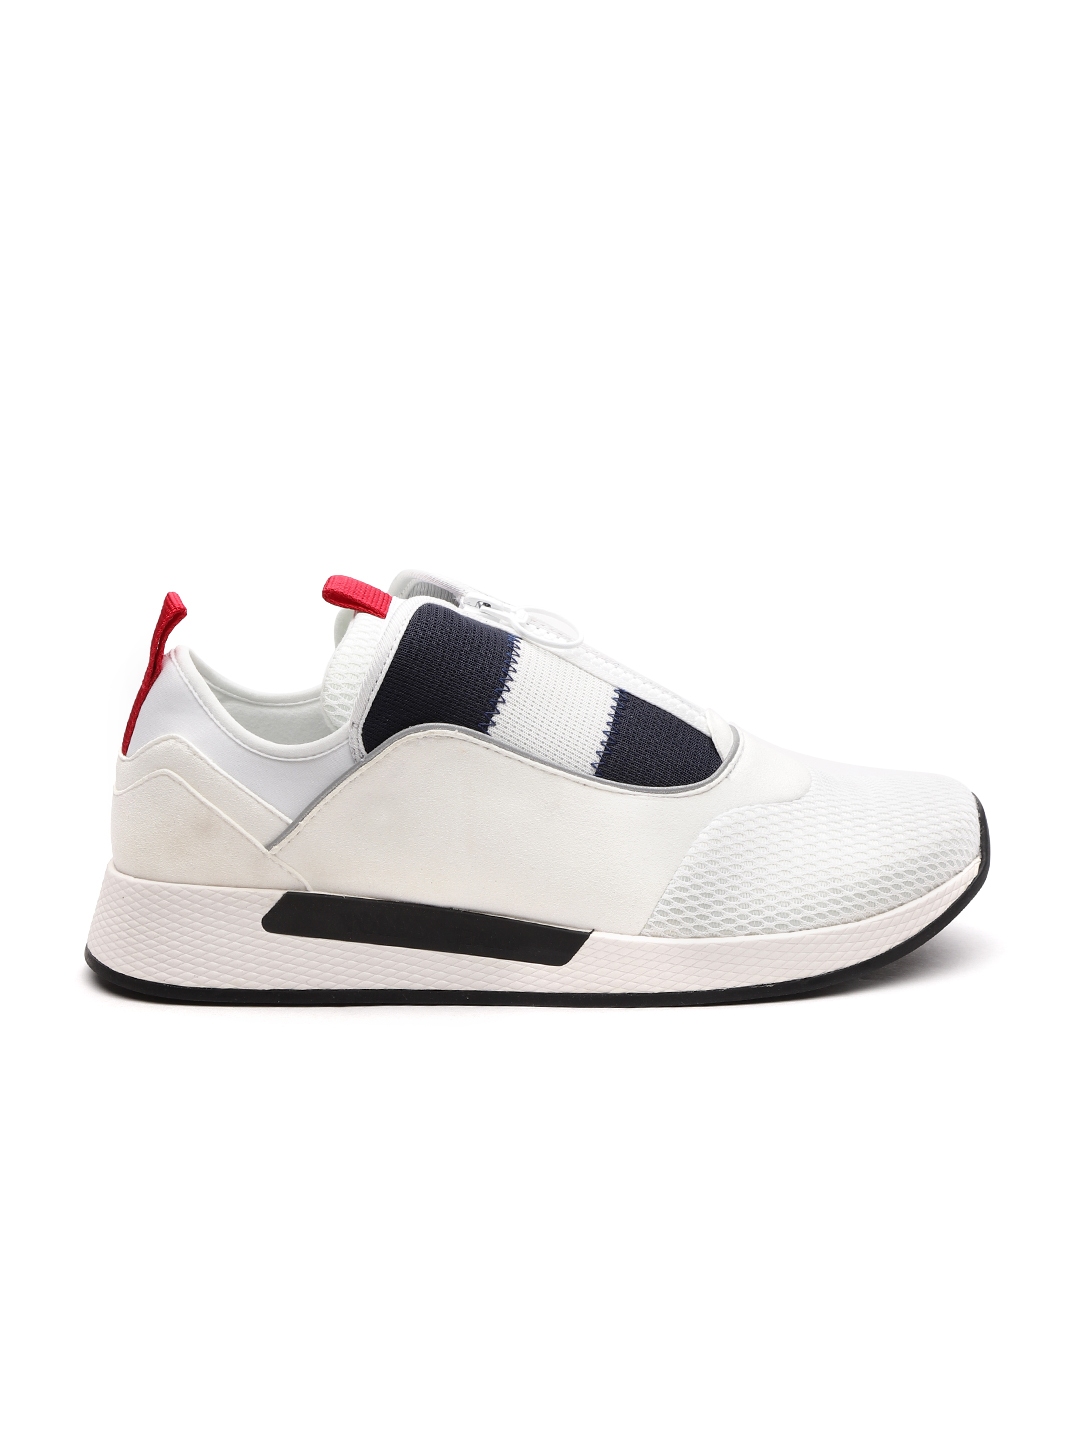 Buy Tommy Hilfiger Men White & Navy Sneakers - Casual Shoes Men 7729637 | Myntra